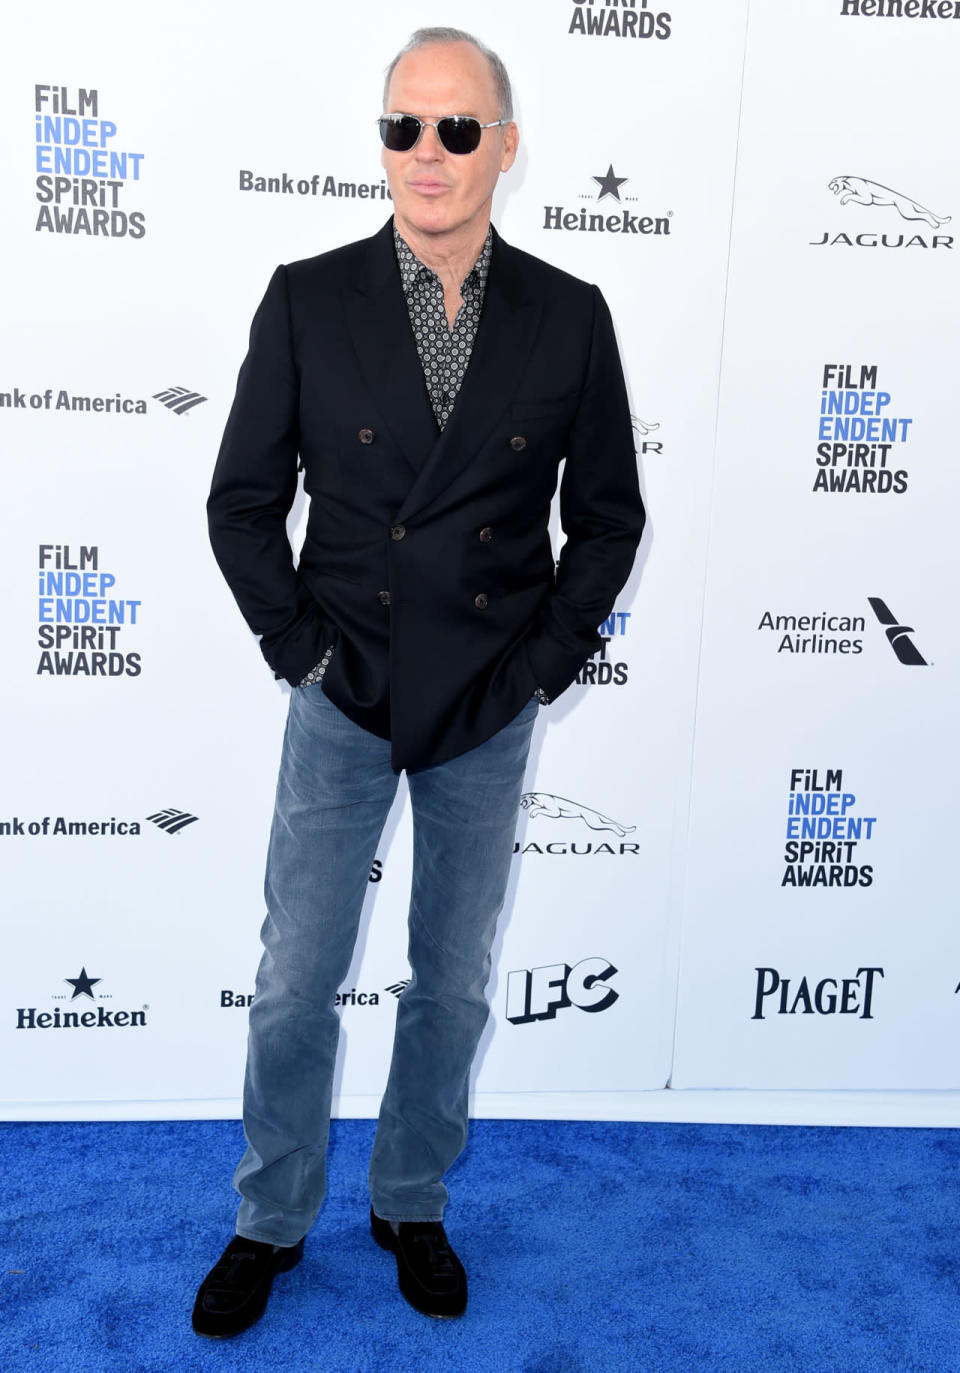 Michael Keaton in jeans and a double-breasted jacket at the 2016 Film Independent Spirit Awards on February 27, 2016 in Santa Monica, California.